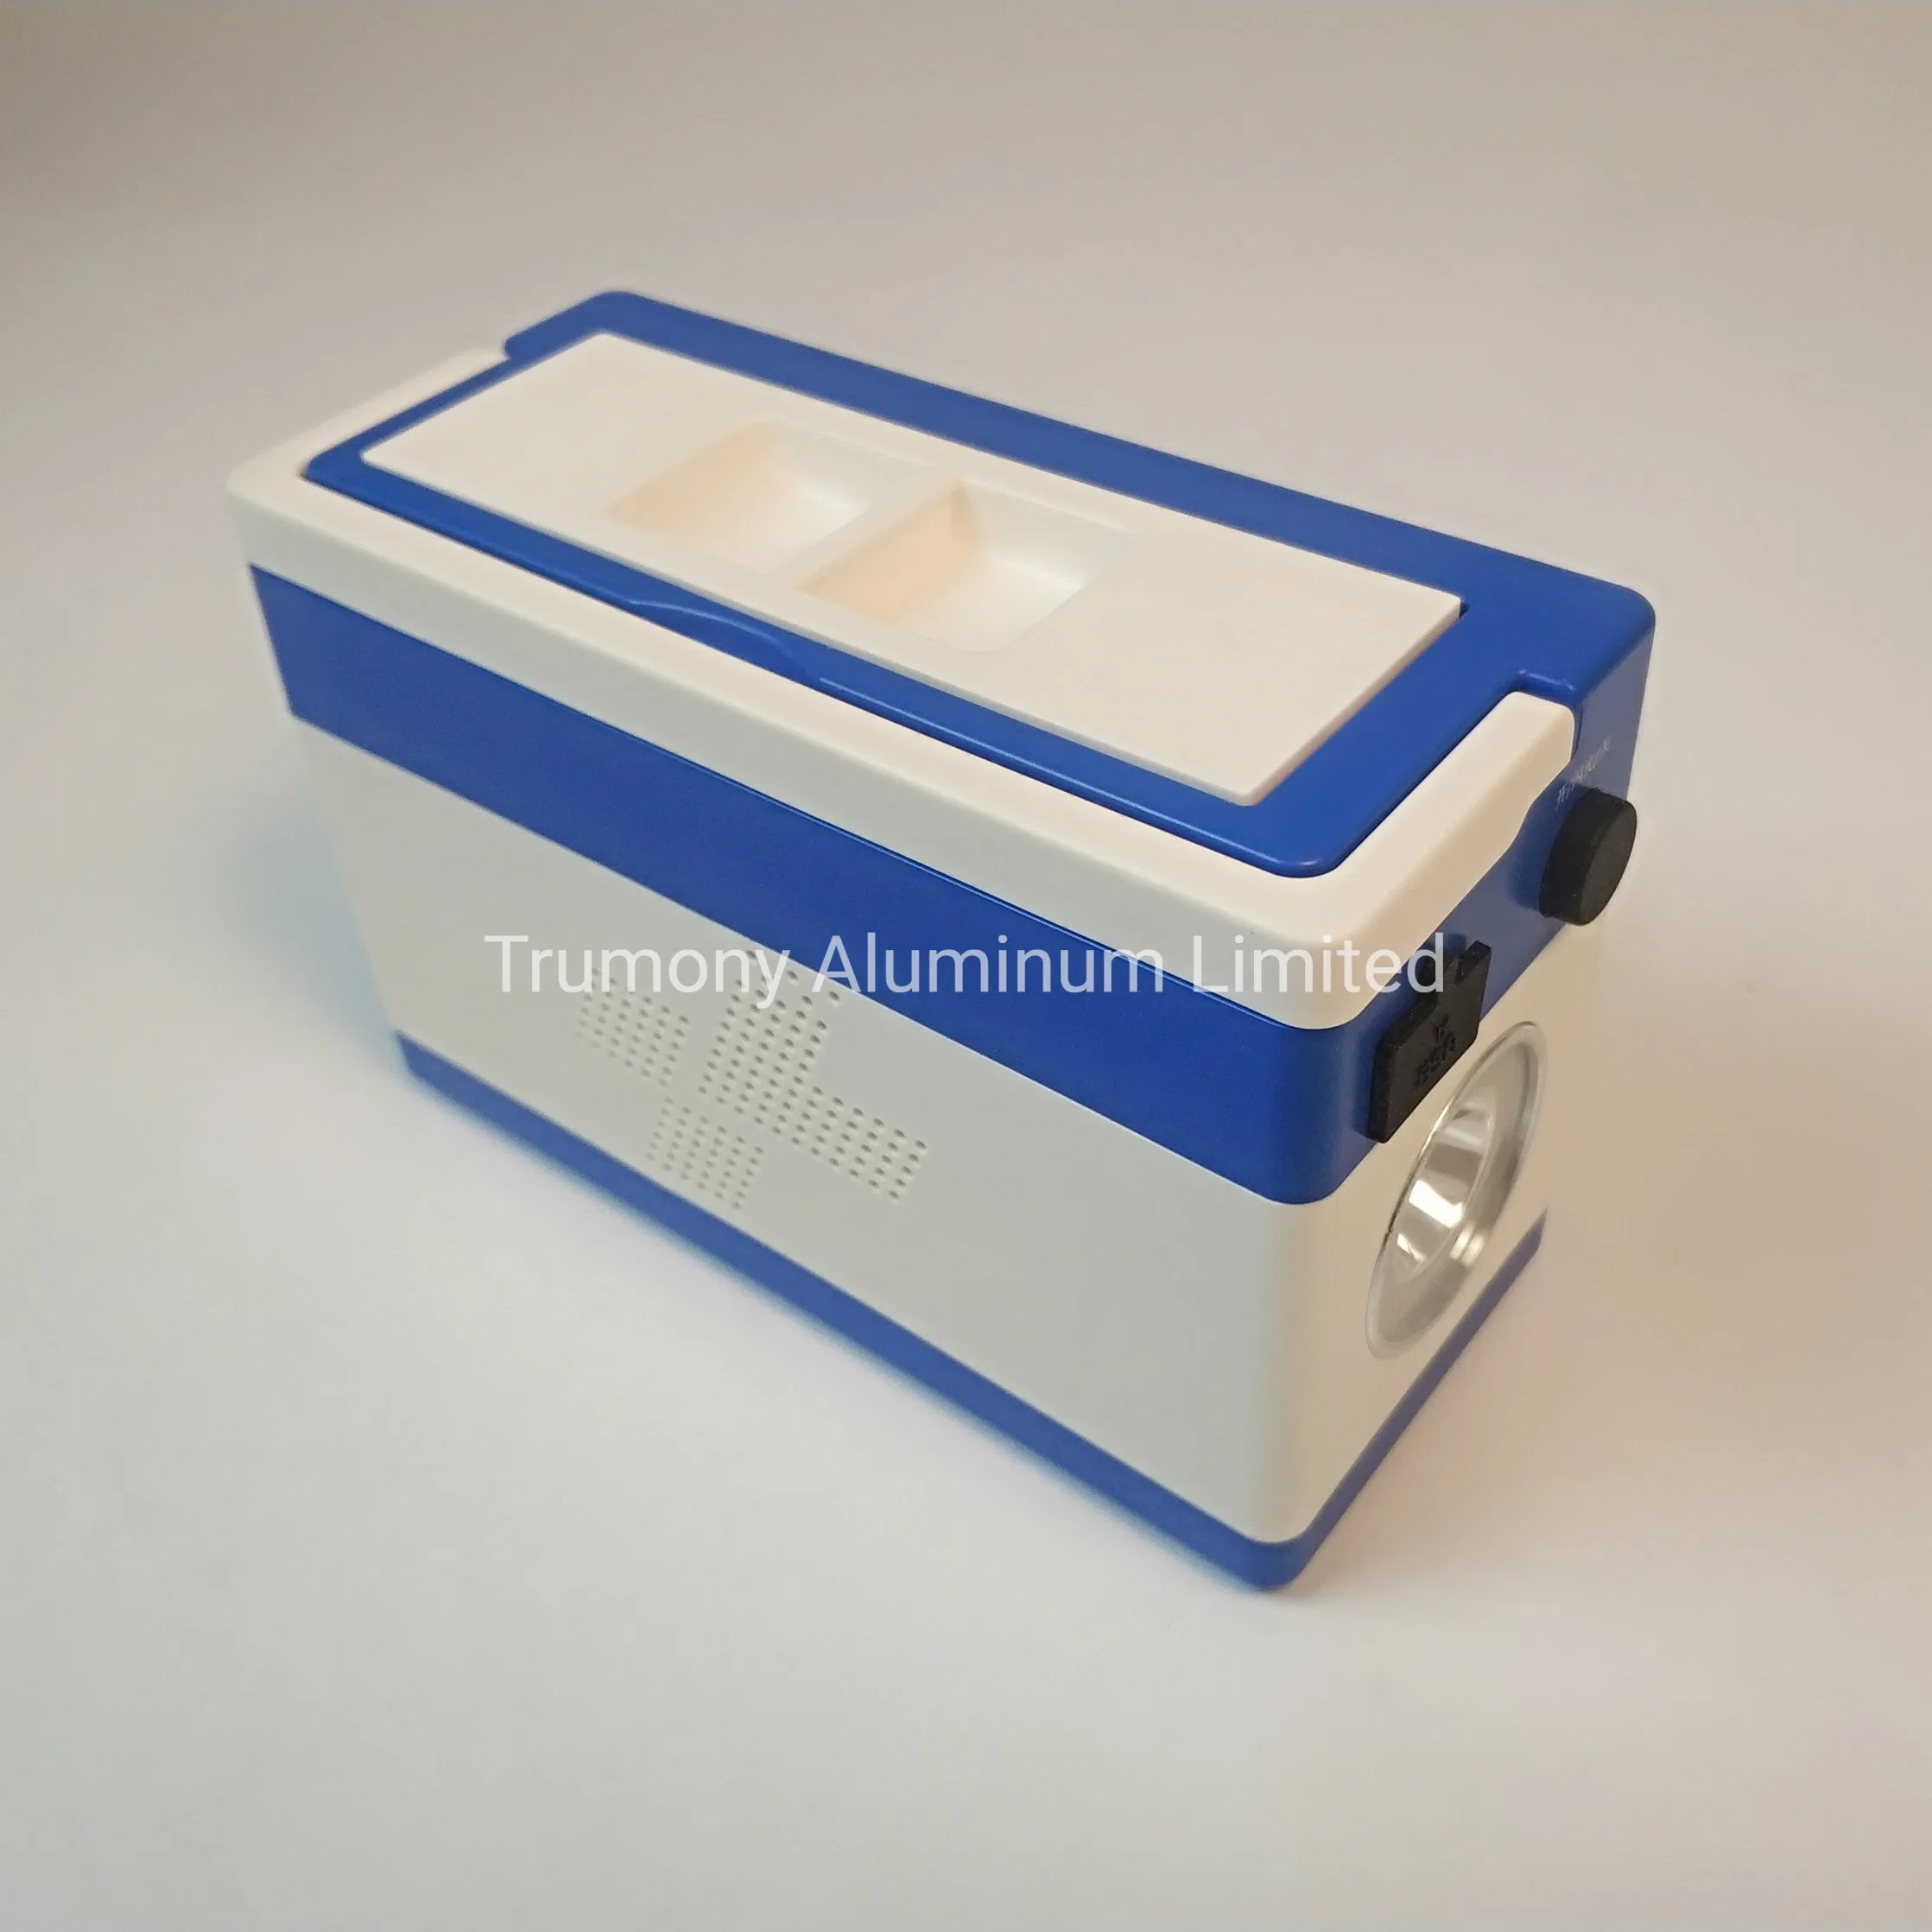 Cost-Effective Metal Air Battery for Exploration Emergency Lighting